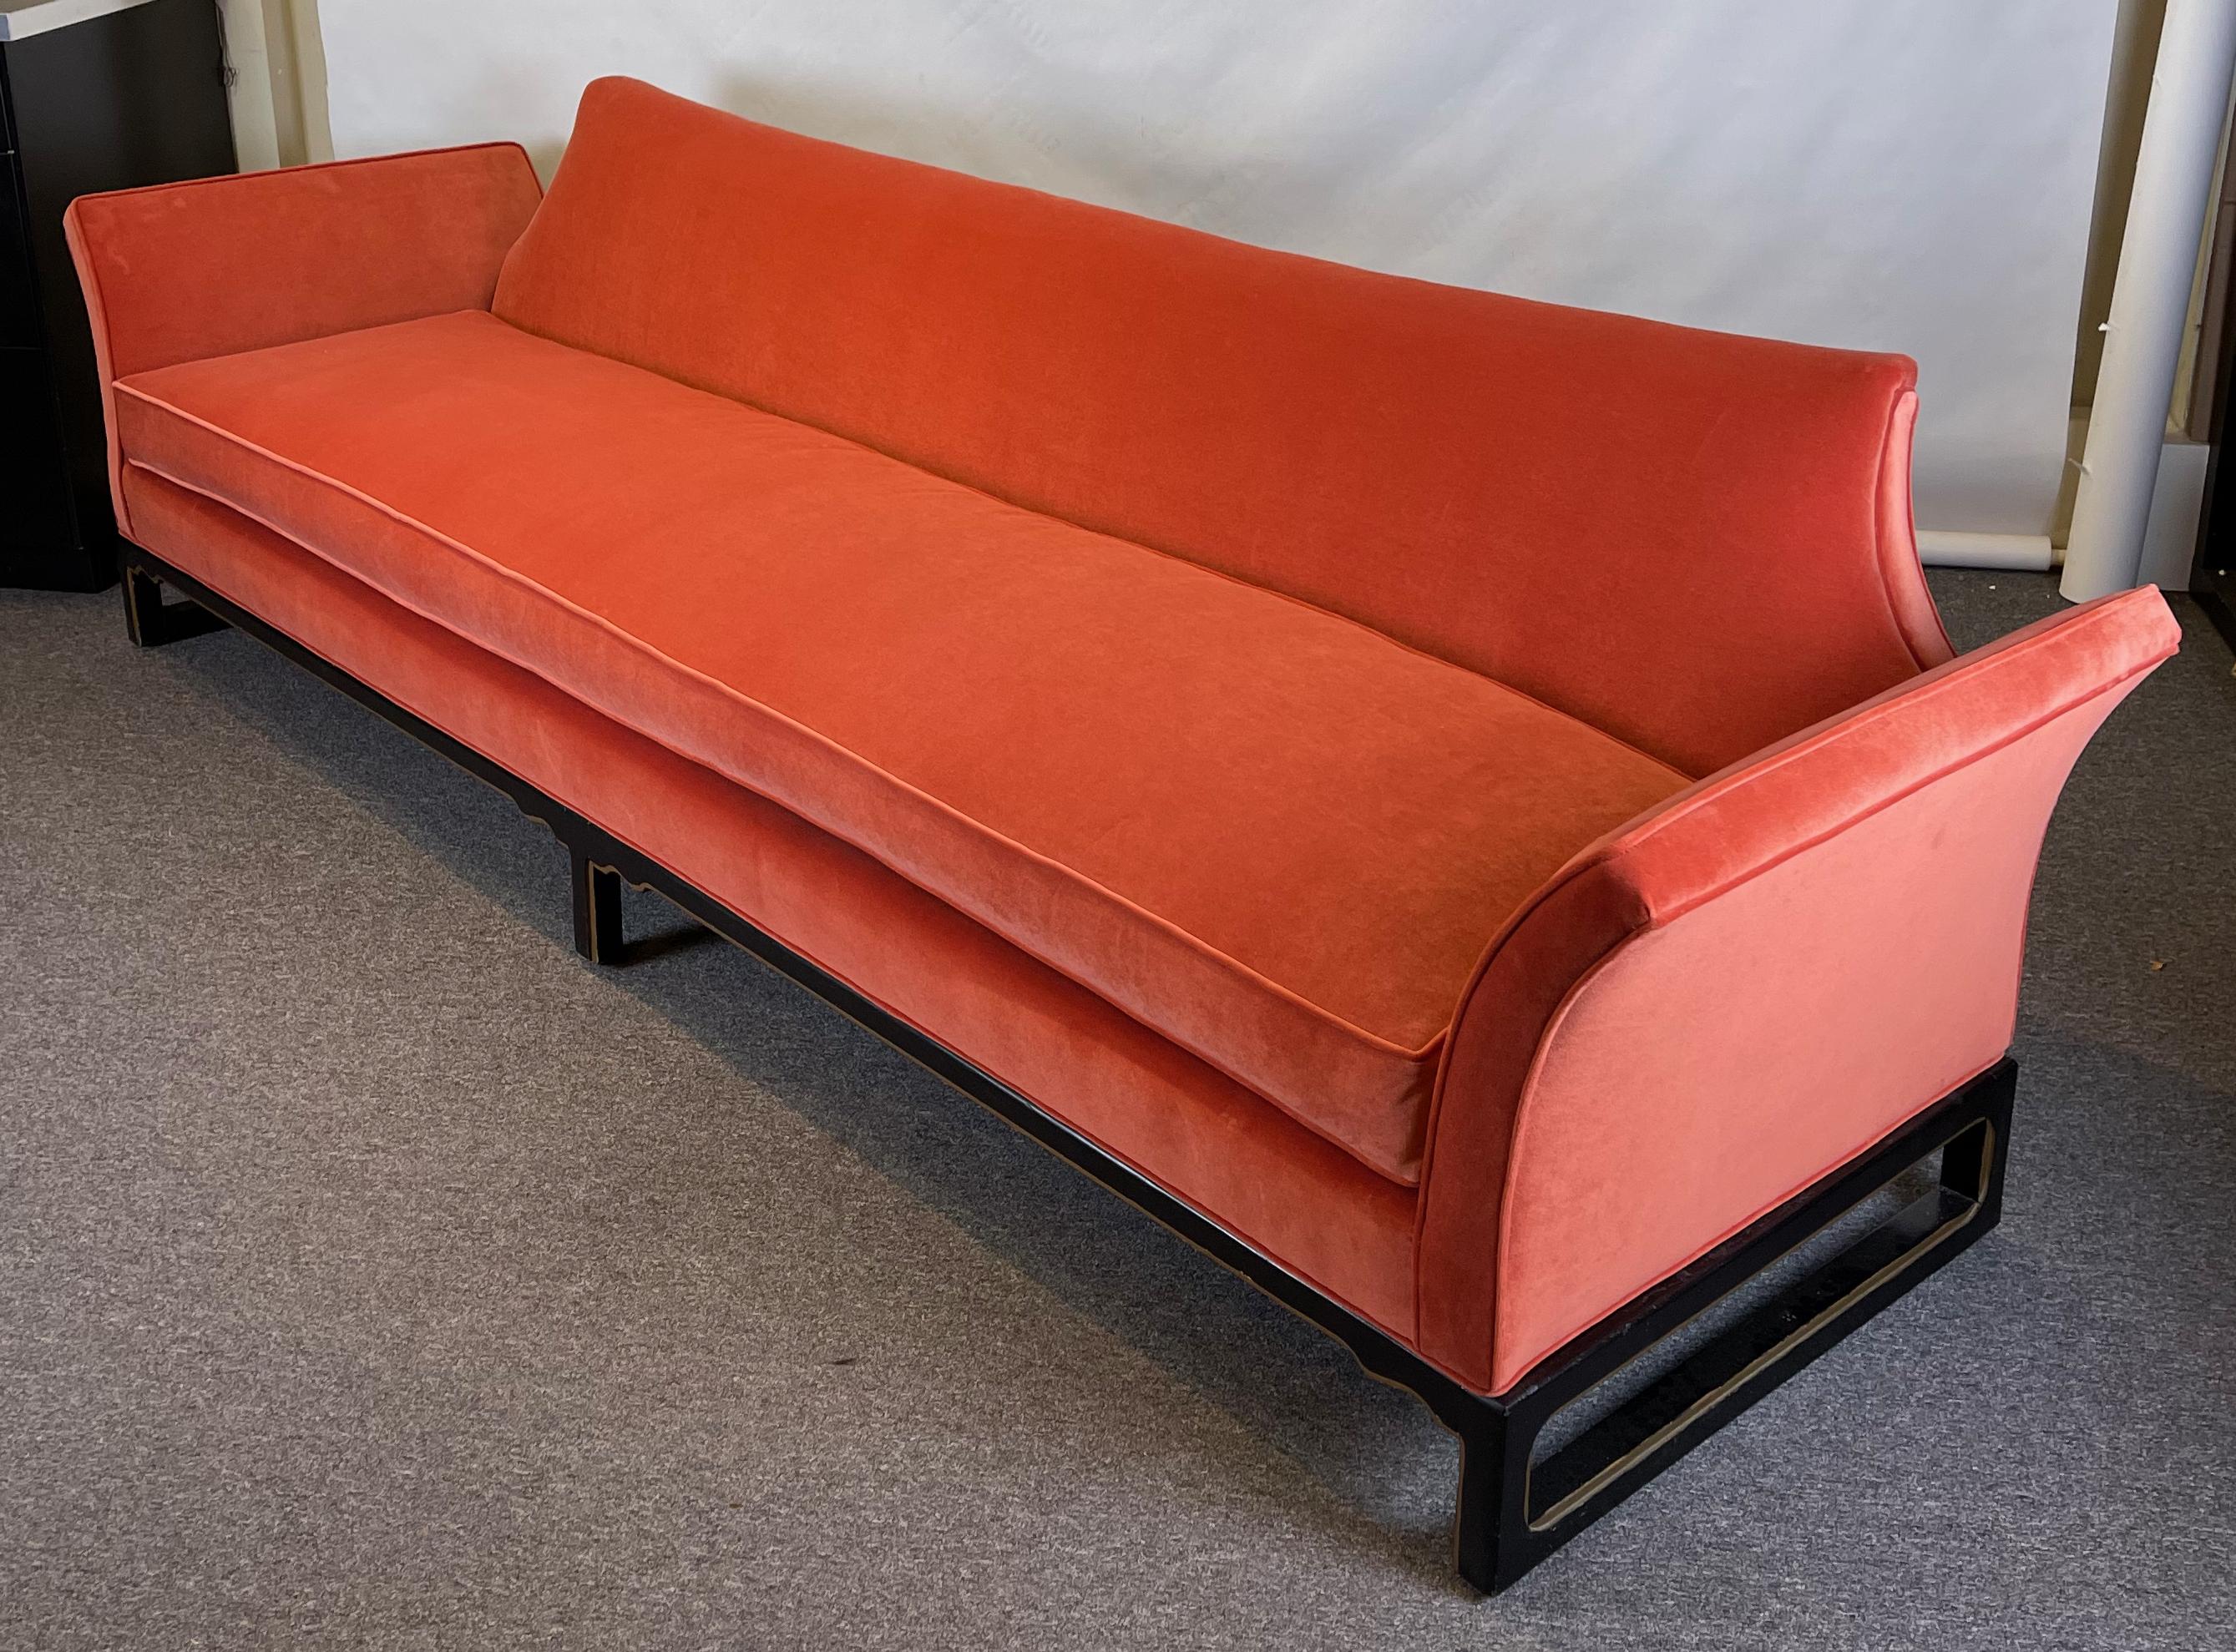 Hand-Crafted Extra Long Mid-Century Sofa by Norman Fox MacGregor For Sale